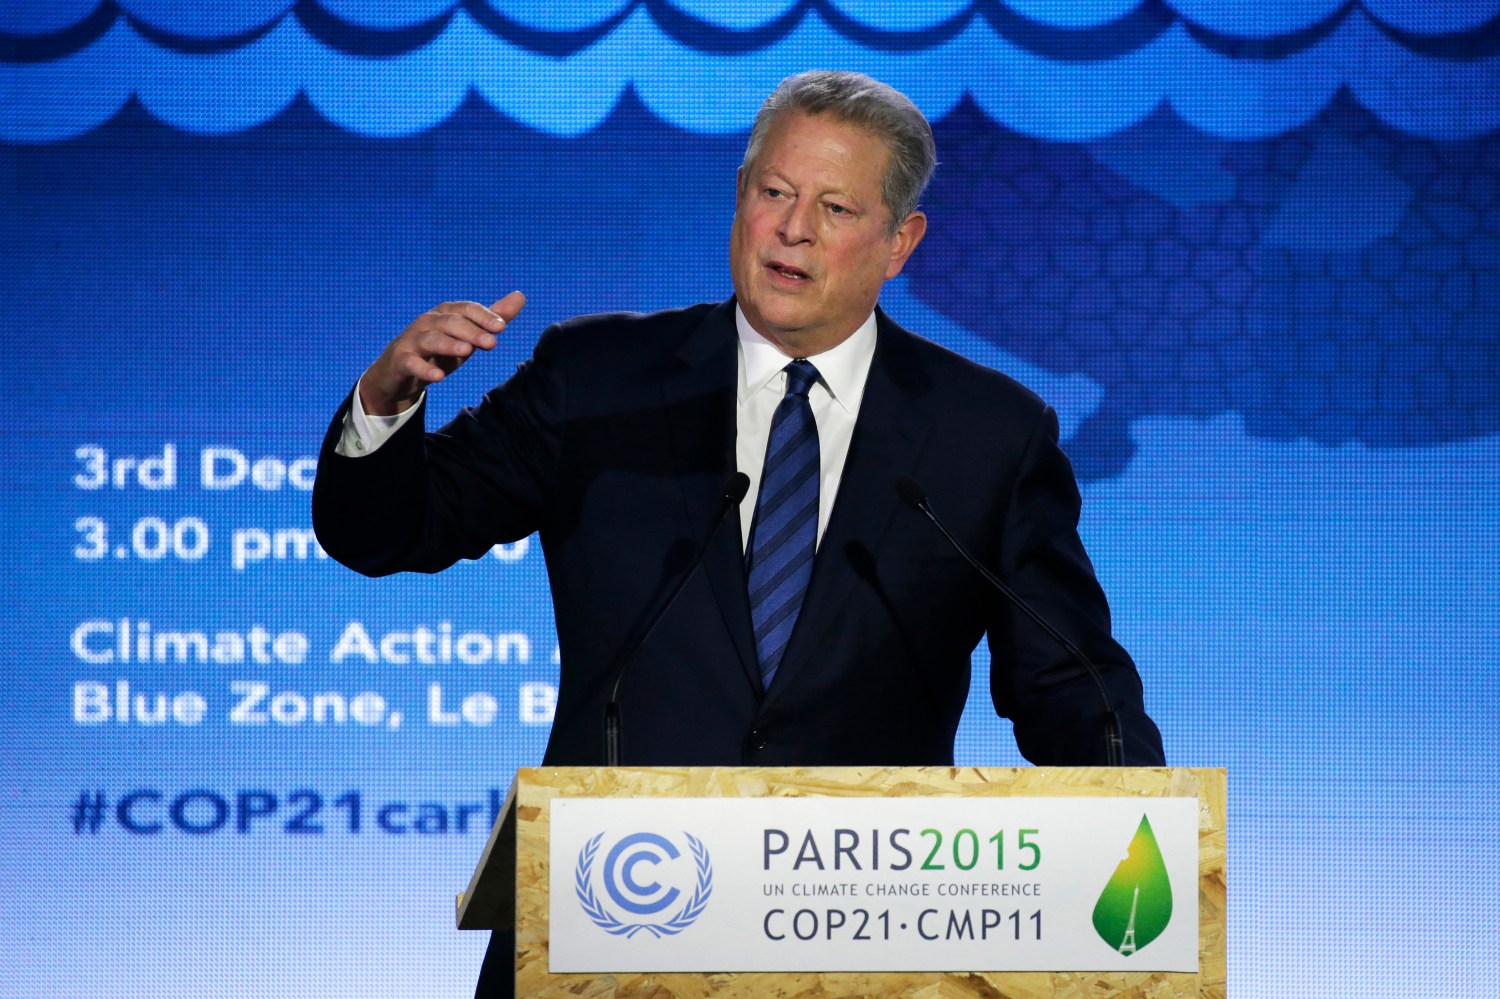 FILE PHOTO - Al Gore delivers a speech at the World Climate Change Conference 2015 (COP21) in Le Bourget